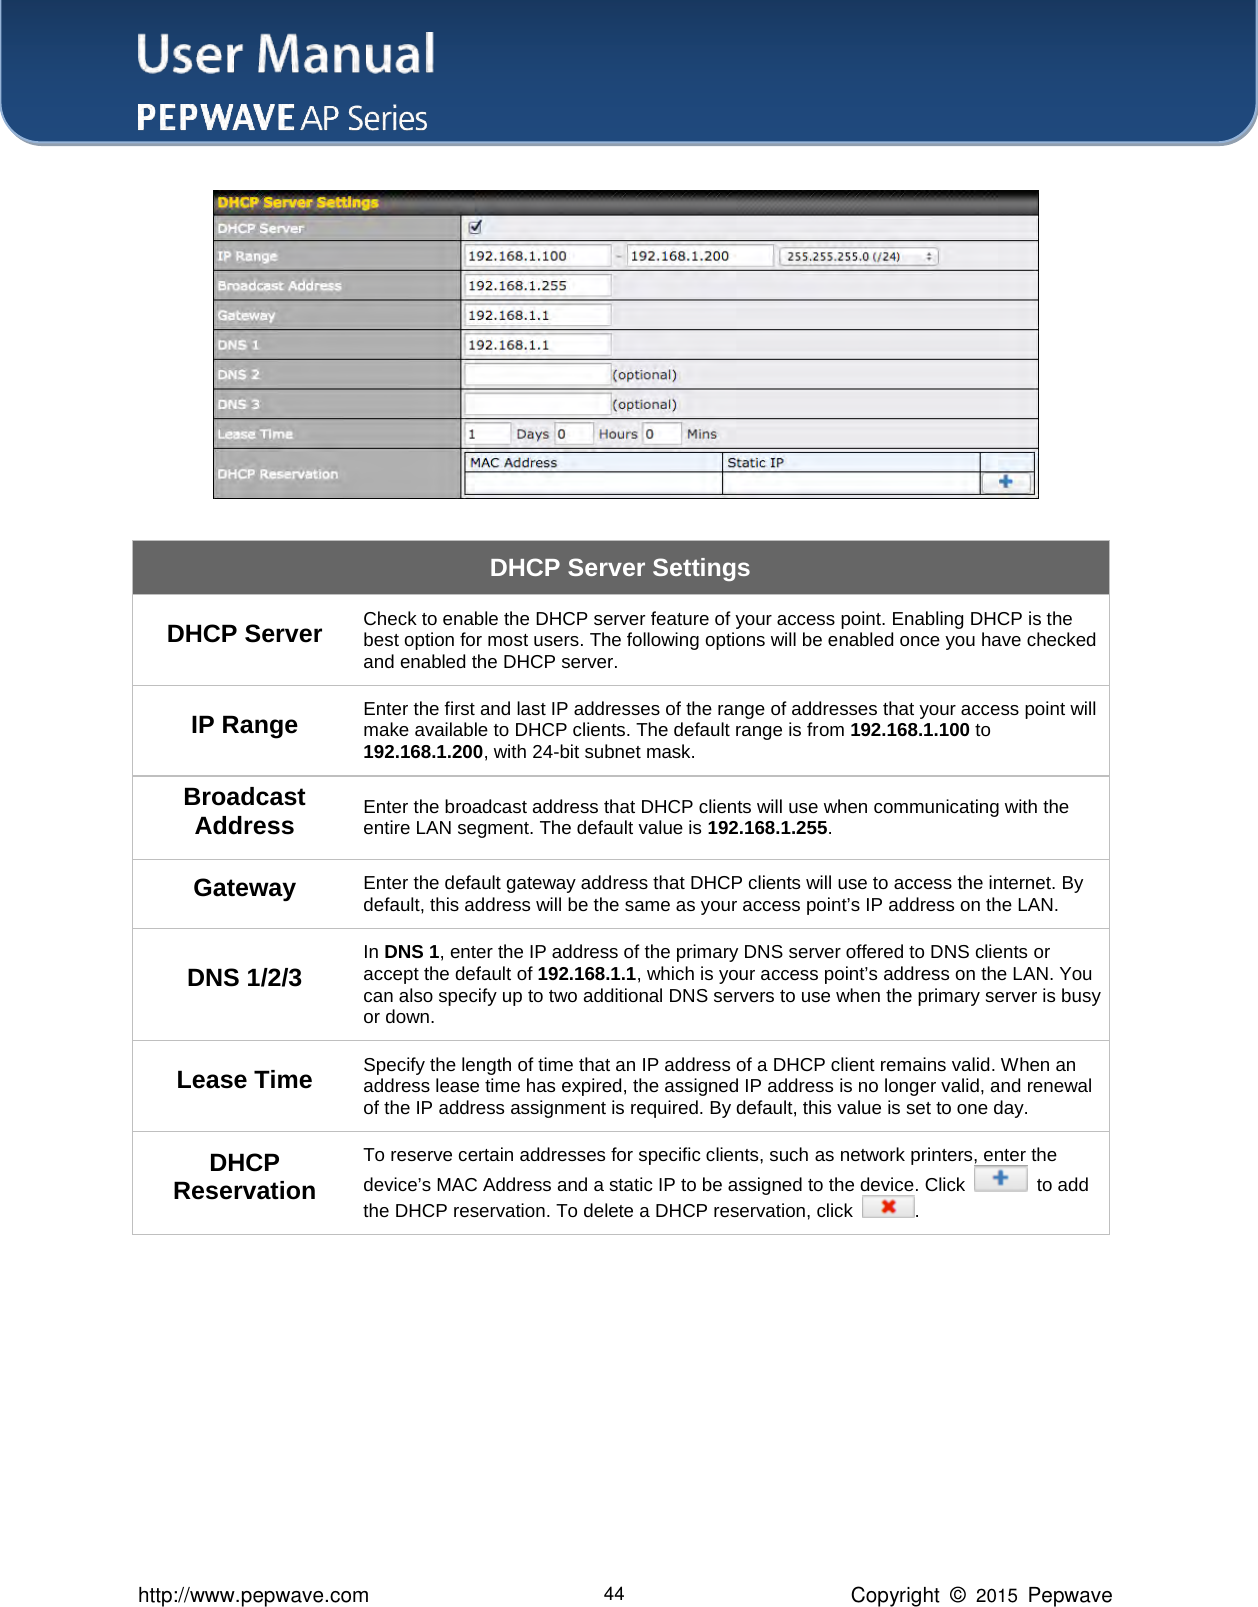 User Manual    http://www.pepwave.com 44 Copyright  ©  2015  Pepwave  DHCP Server Settings DHCP Server Check to enable the DHCP server feature of your access point. Enabling DHCP is the best option for most users. The following options will be enabled once you have checked and enabled the DHCP server. IP Range Enter the first and last IP addresses of the range of addresses that your access point will make available to DHCP clients. The default range is from 192.168.1.100 to 192.168.1.200, with 24-bit subnet mask. Broadcast Address Enter the broadcast address that DHCP clients will use when communicating with the entire LAN segment. The default value is 192.168.1.255. Gateway Enter the default gateway address that DHCP clients will use to access the internet. By default, this address will be the same as your access point’s IP address on the LAN. DNS 1/2/3 In DNS 1, enter the IP address of the primary DNS server offered to DNS clients or accept the default of 192.168.1.1, which is your access point’s address on the LAN. You can also specify up to two additional DNS servers to use when the primary server is busy or down. Lease Time Specify the length of time that an IP address of a DHCP client remains valid. When an address lease time has expired, the assigned IP address is no longer valid, and renewal of the IP address assignment is required. By default, this value is set to one day. DHCP Reservation To reserve certain addresses for specific clients, such as network printers, enter the device’s MAC Address and a static IP to be assigned to the device. Click    to add the DHCP reservation. To delete a DHCP reservation, click  .      